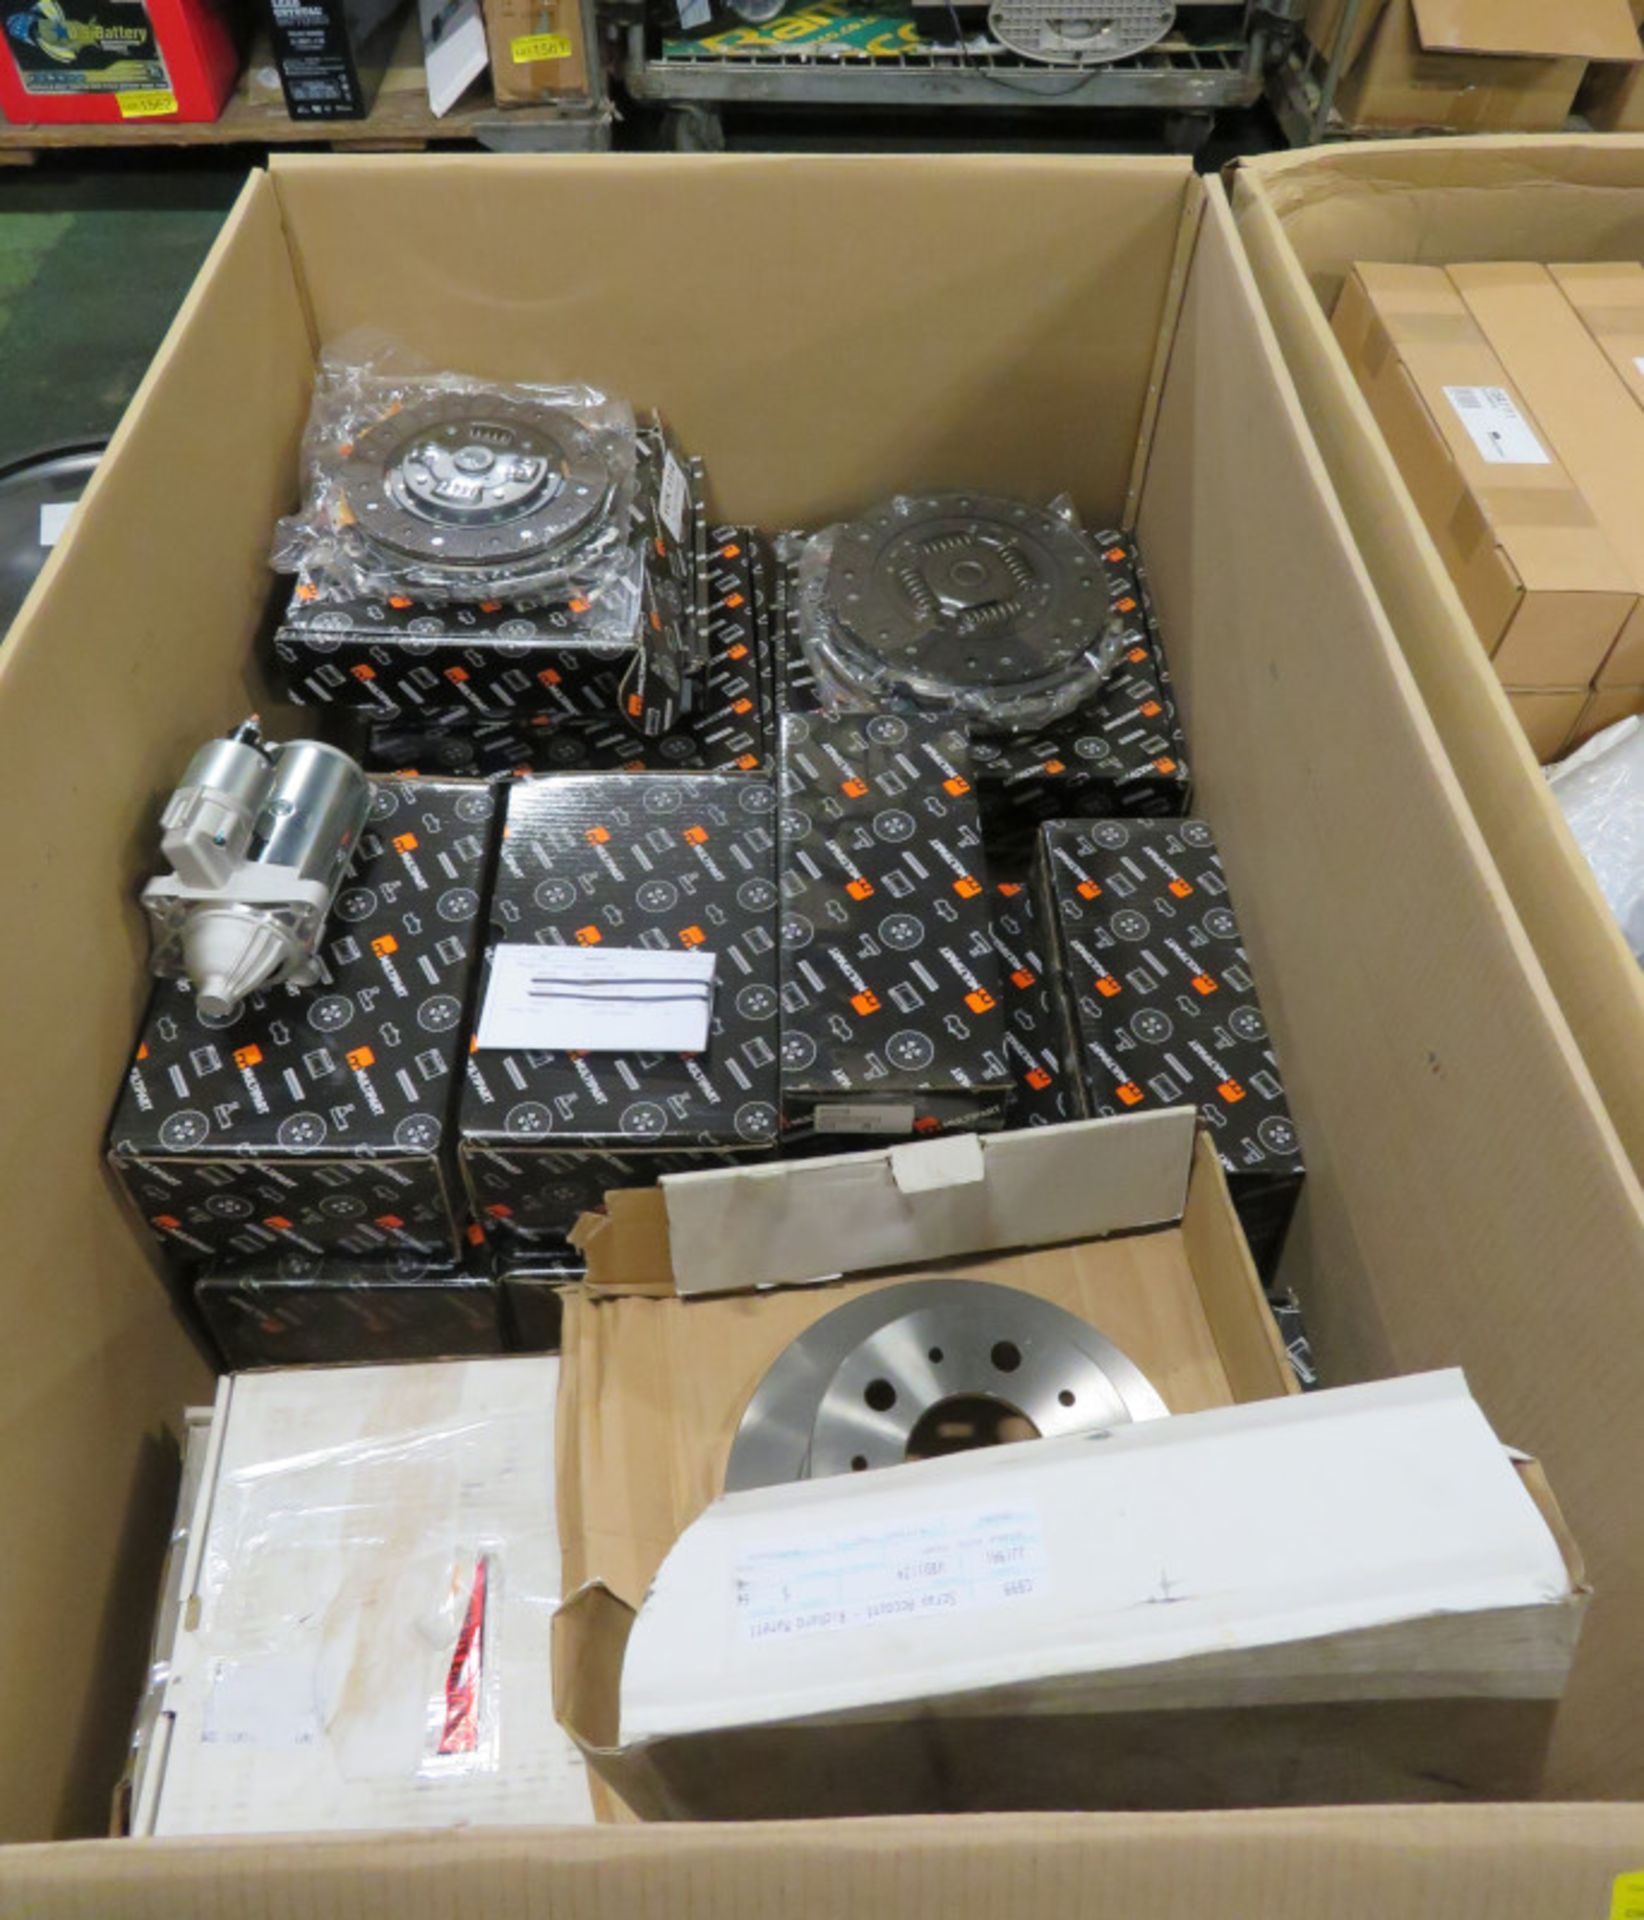 Vehicle Parts - Brake Discs, Clutch Kits & Starter Motors 2.2kw, 10T - see picture for iti